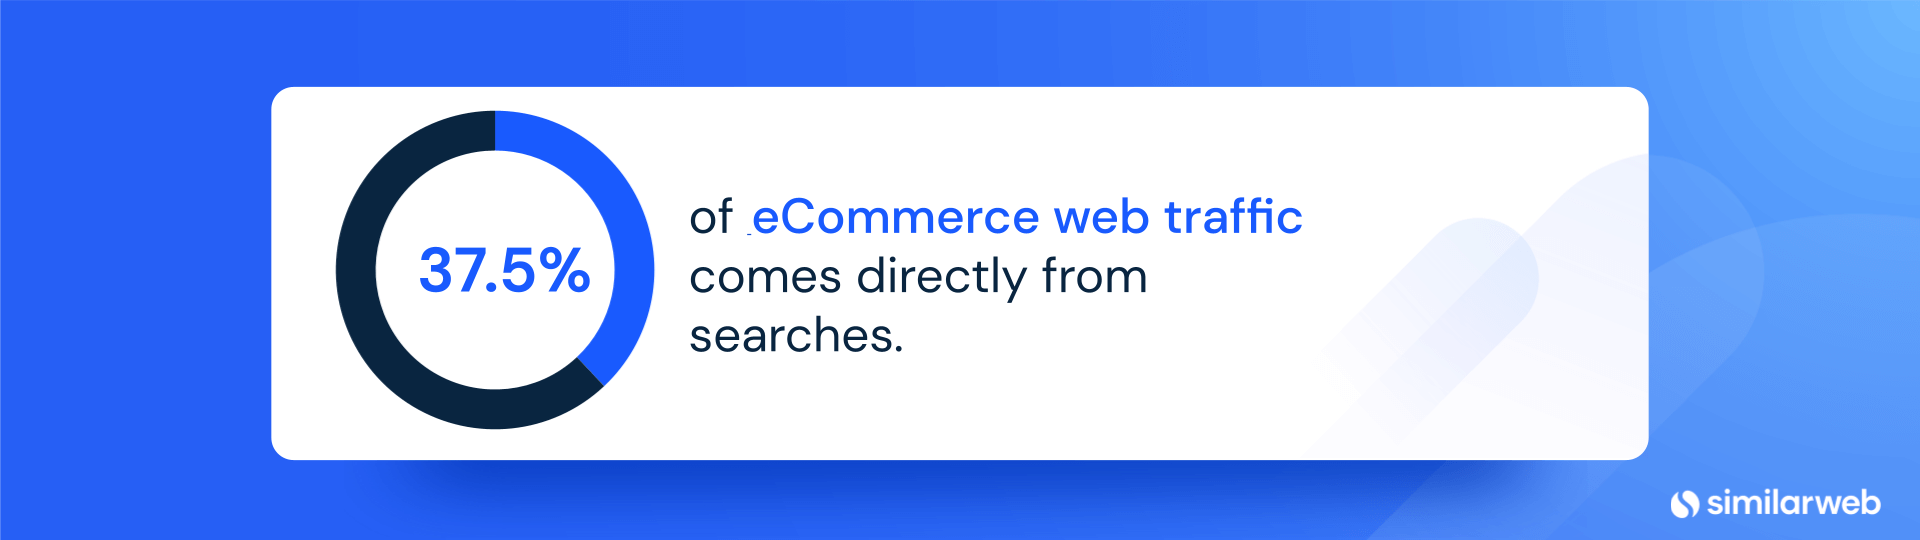 37.5% of eCommerce web traffic comes directly from searches.